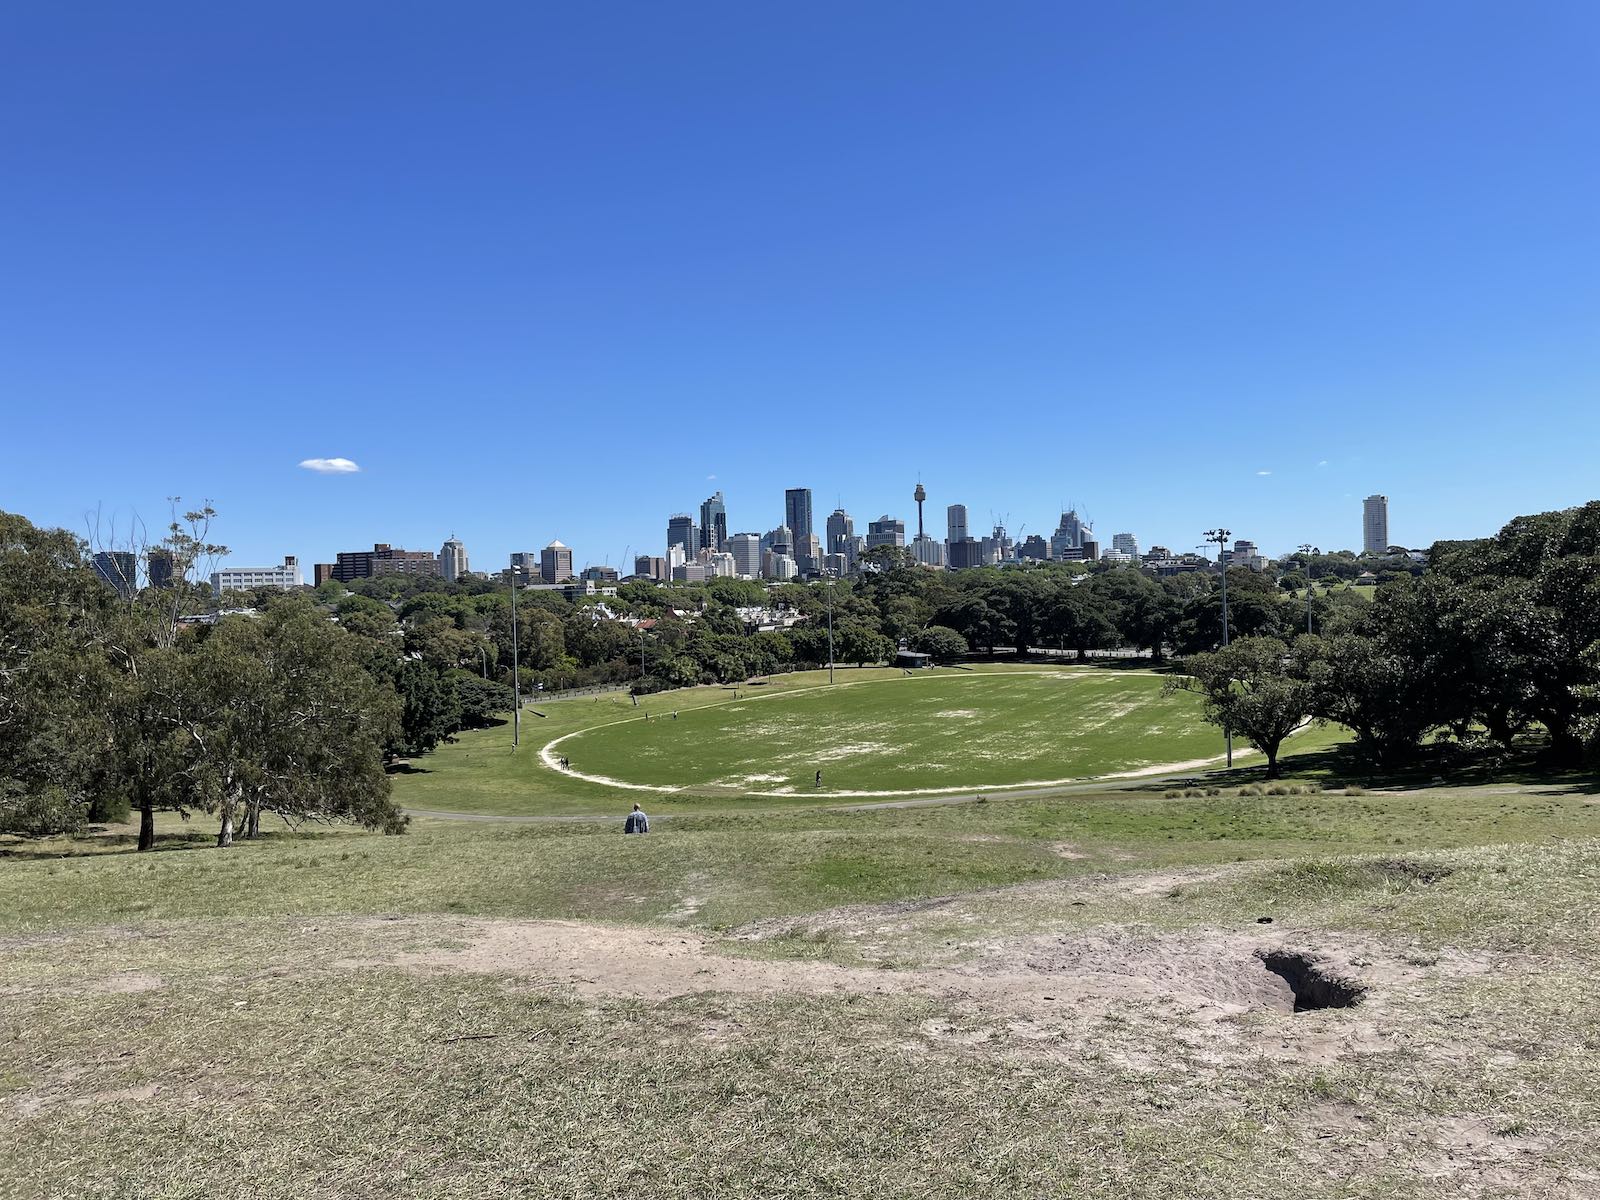 A view of the city of Sydney, Australia, seen from the top of a hill. At the bottom of the hill in the foreground is a sports oval with grass that is well trodden and no longer very green